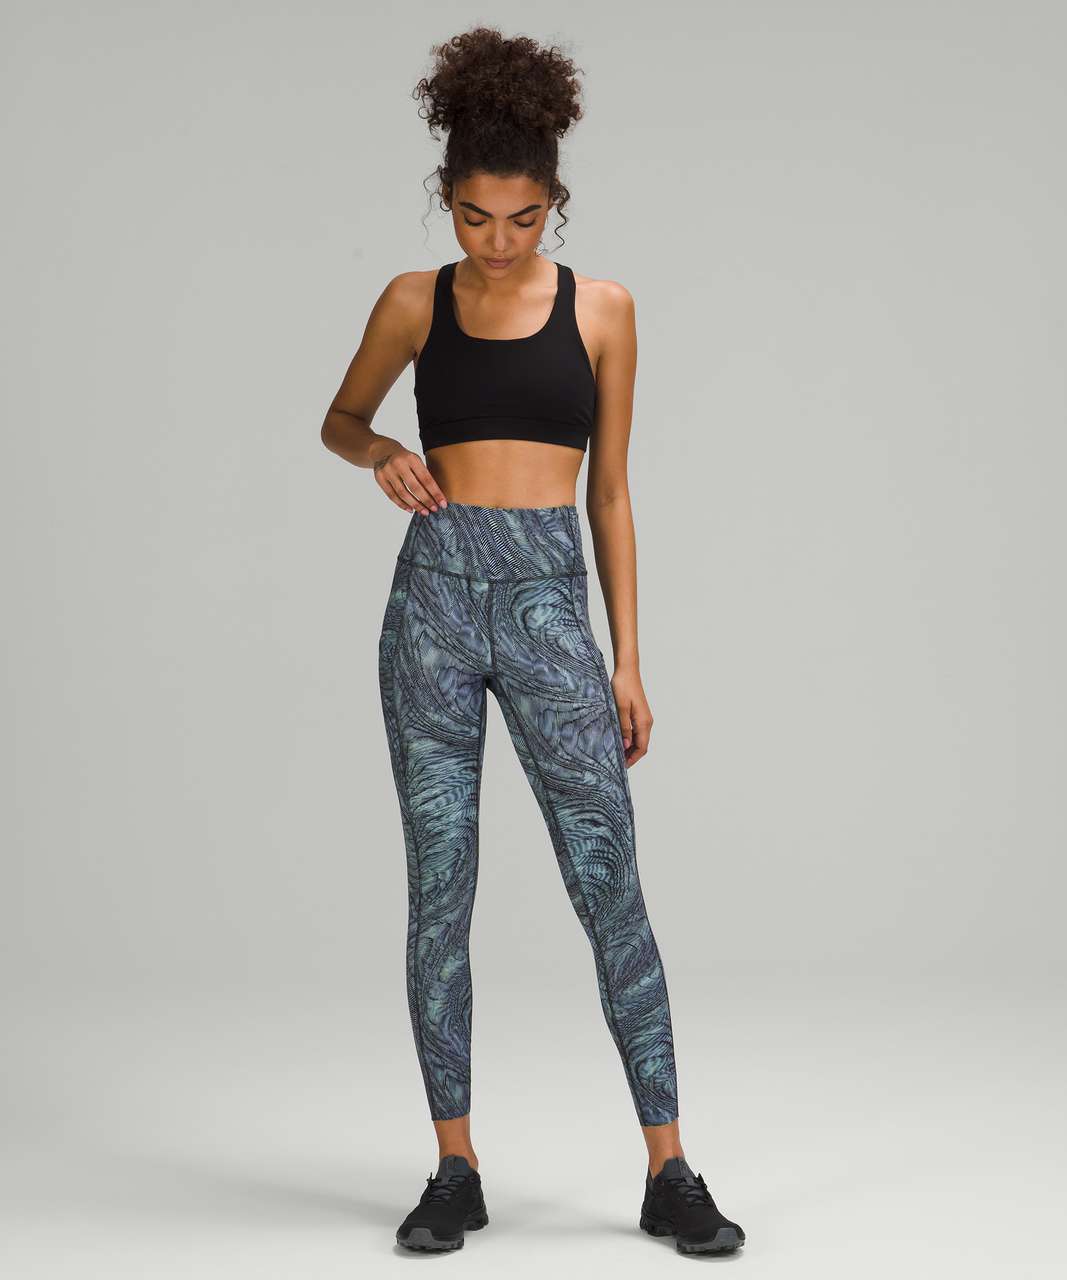 Lululemon Fast and Free Tight 25" *Non-Reflective Nulux - Dimensional Icing Blue Multi